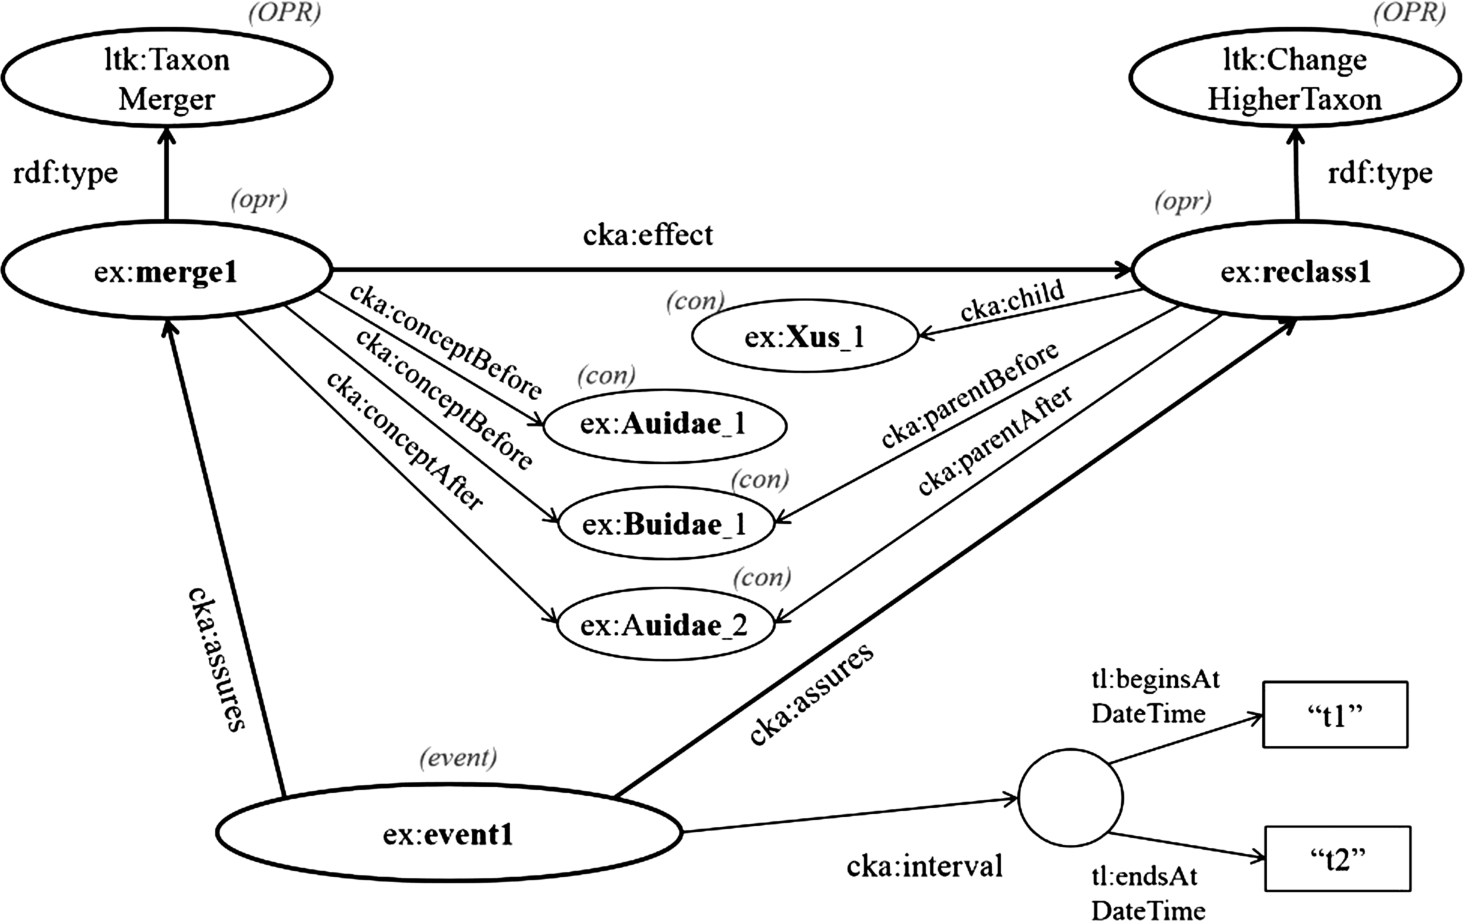 Model: Example event-centric model for representing changes in taxonomic knowledge.